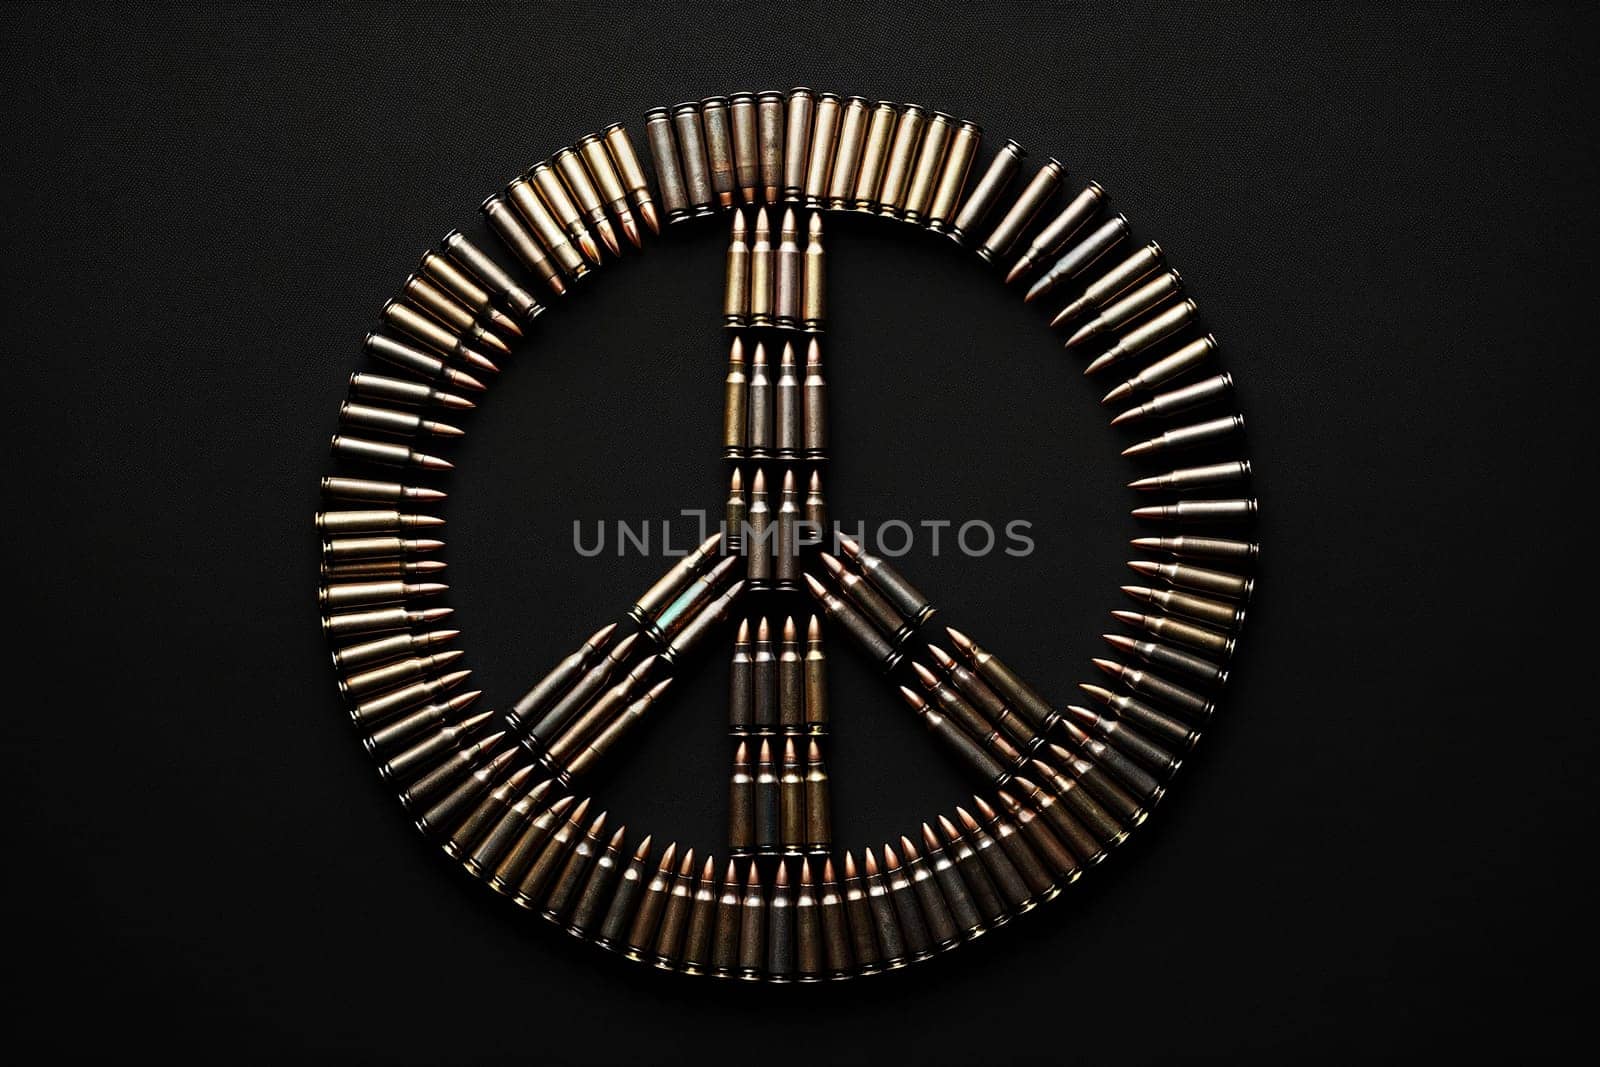 pacifist sign made from cartridges on a black background by Annado